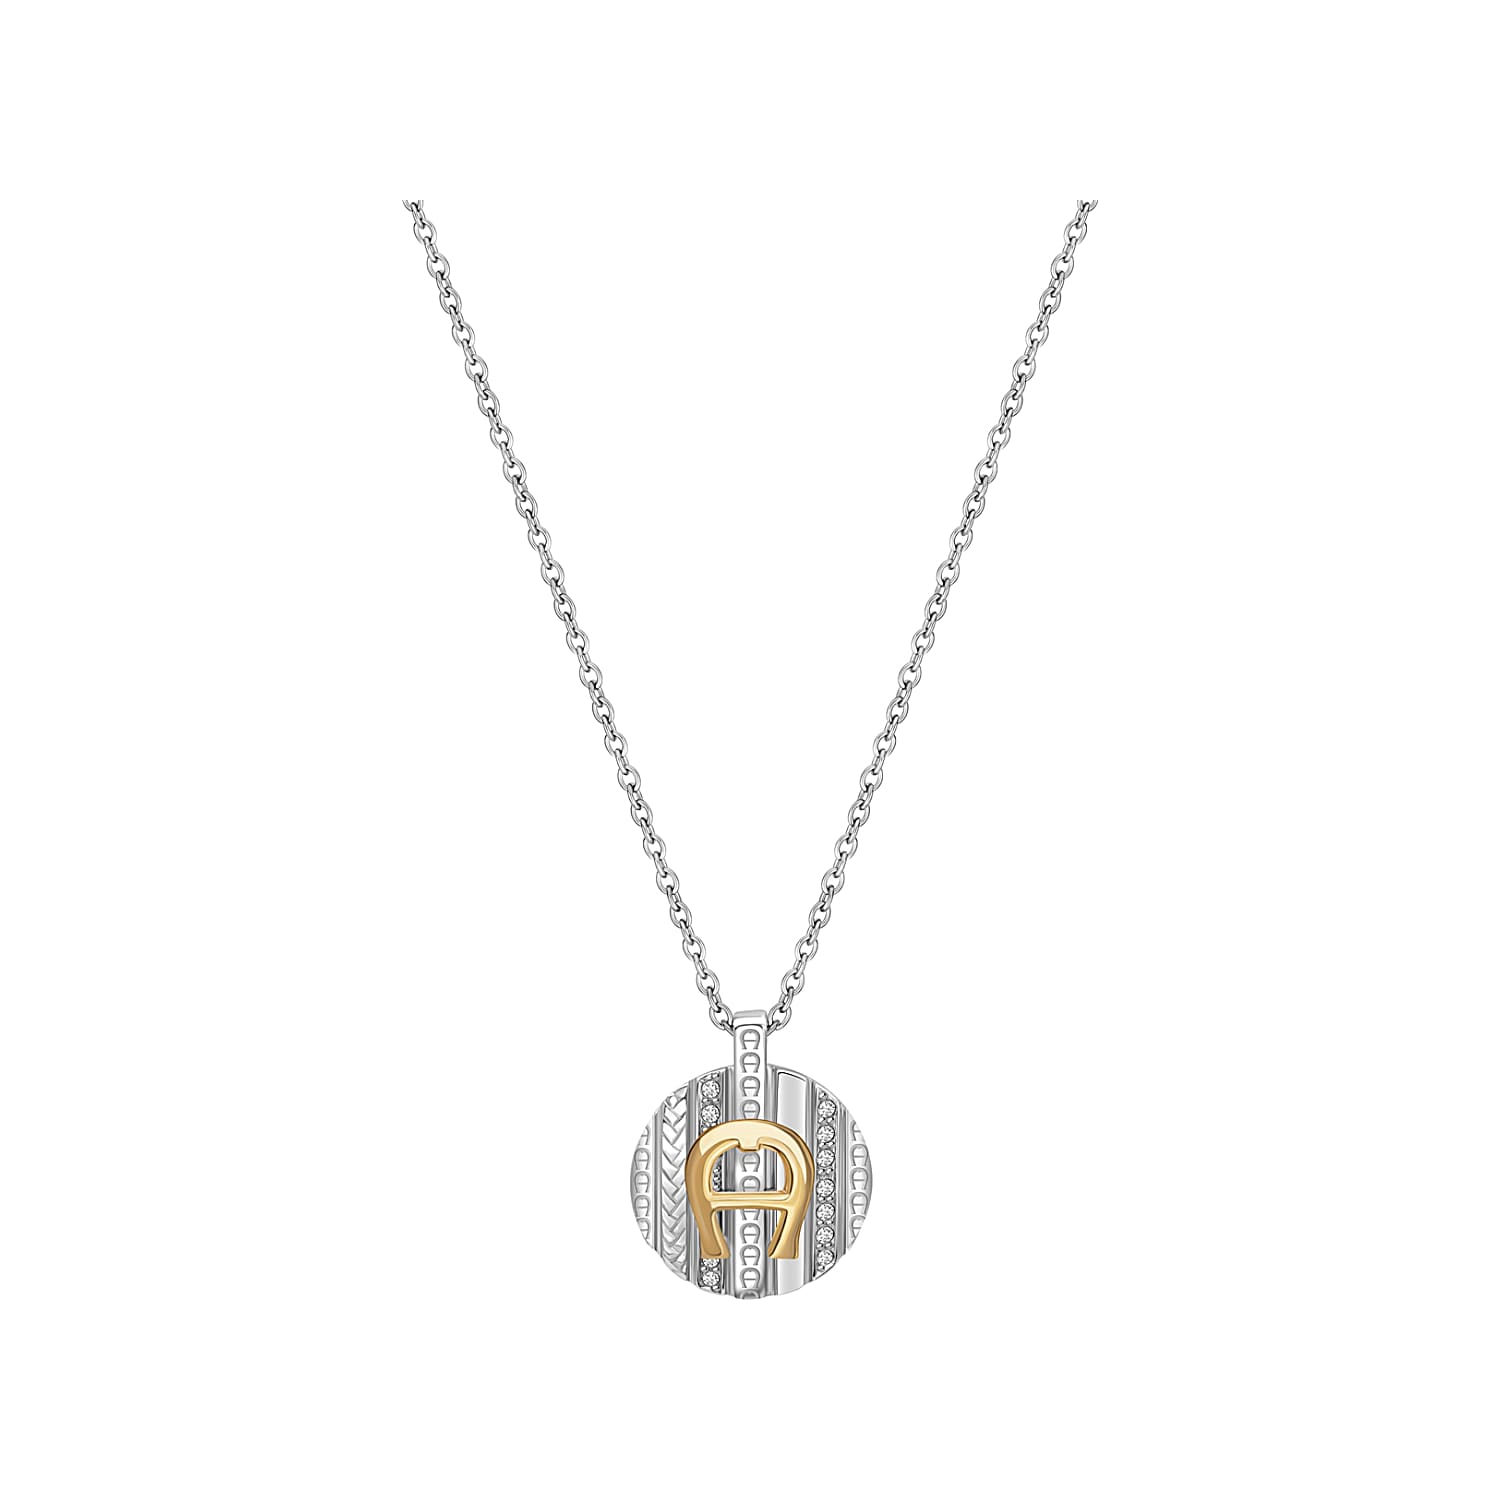 Necklace Guilia two-tone with crystals